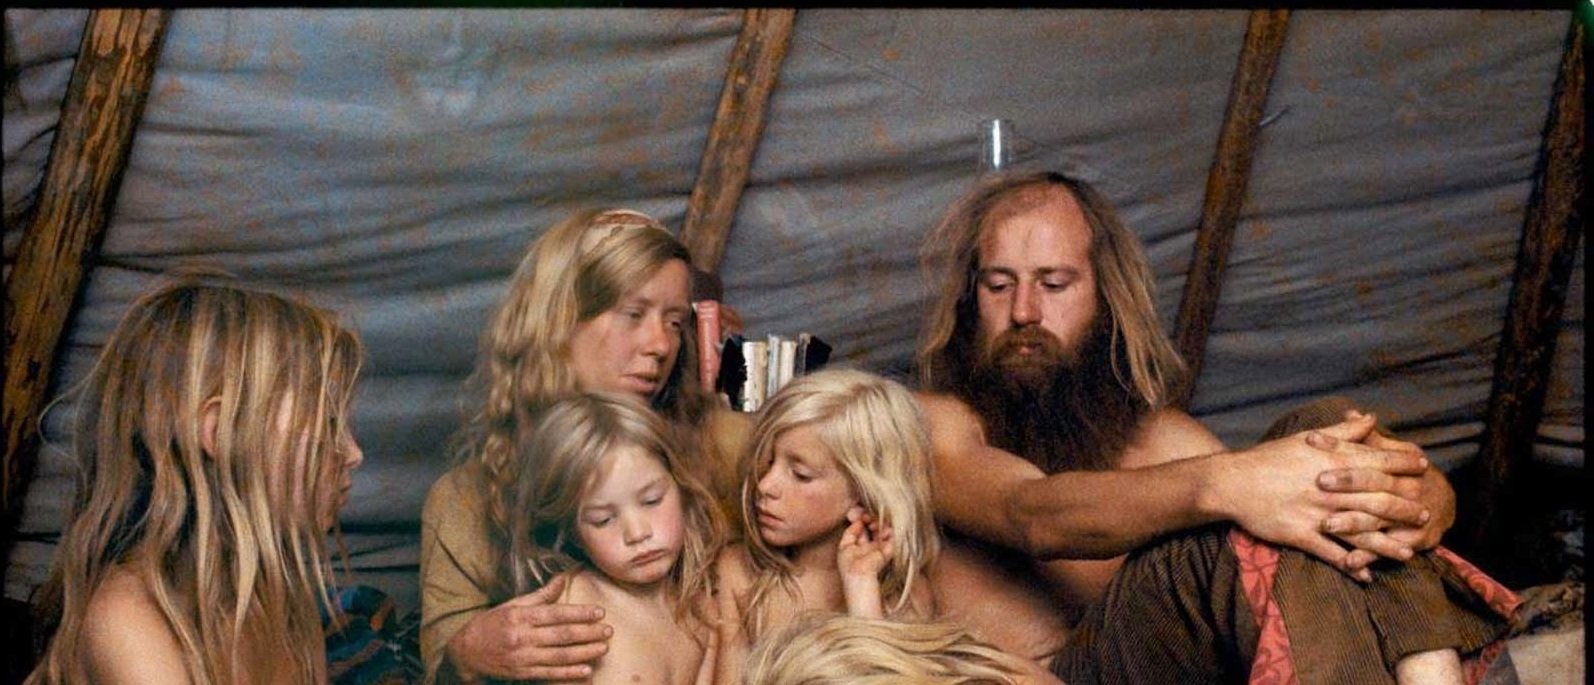 20 Eye-Opening Photographs of Life on Hippie Communes.